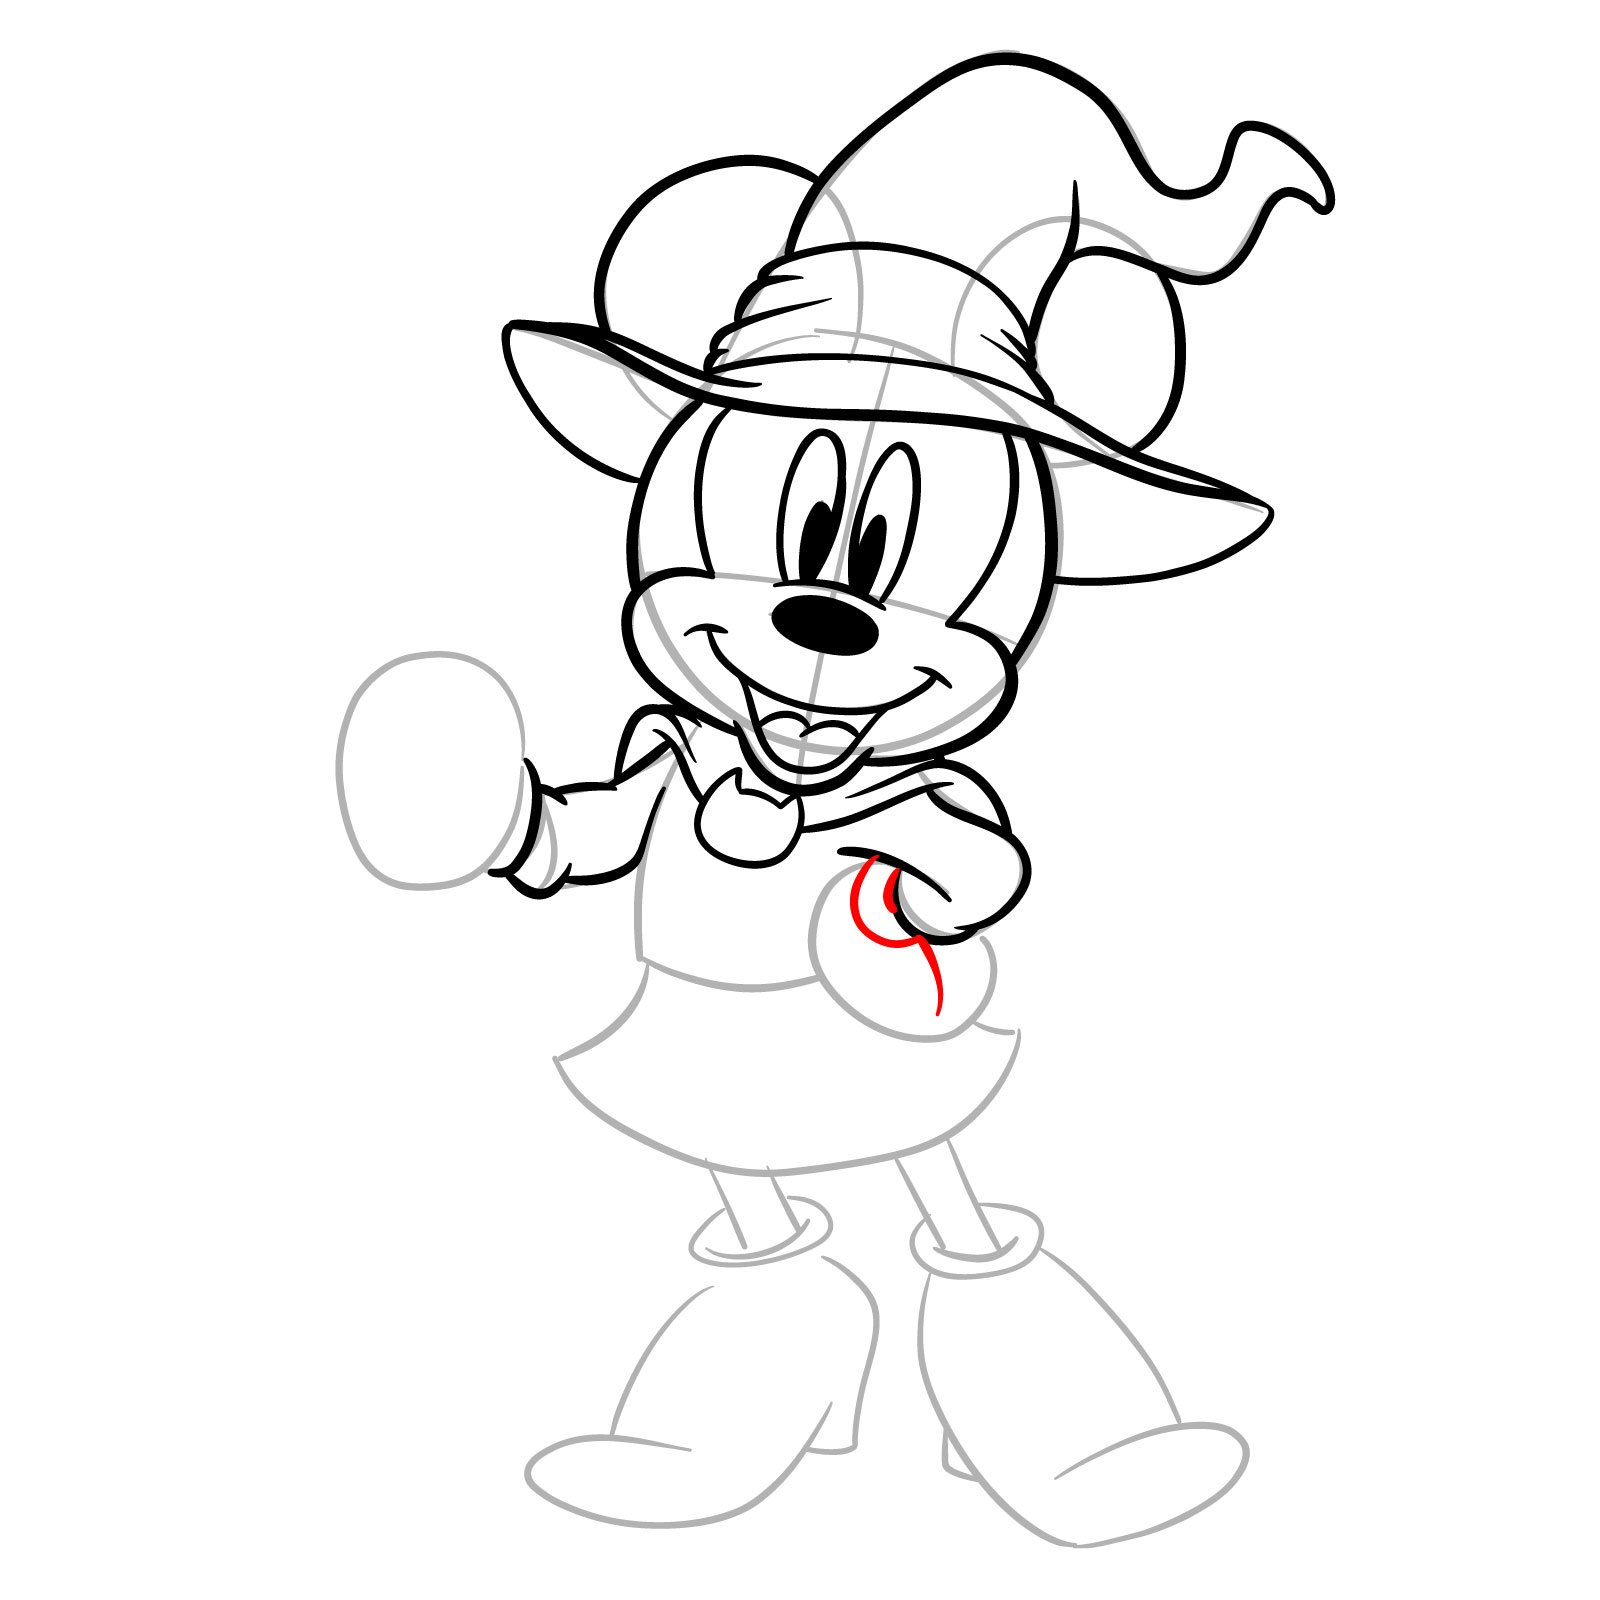 How to draw Halloween Minnie Mouse as a witch - step 17